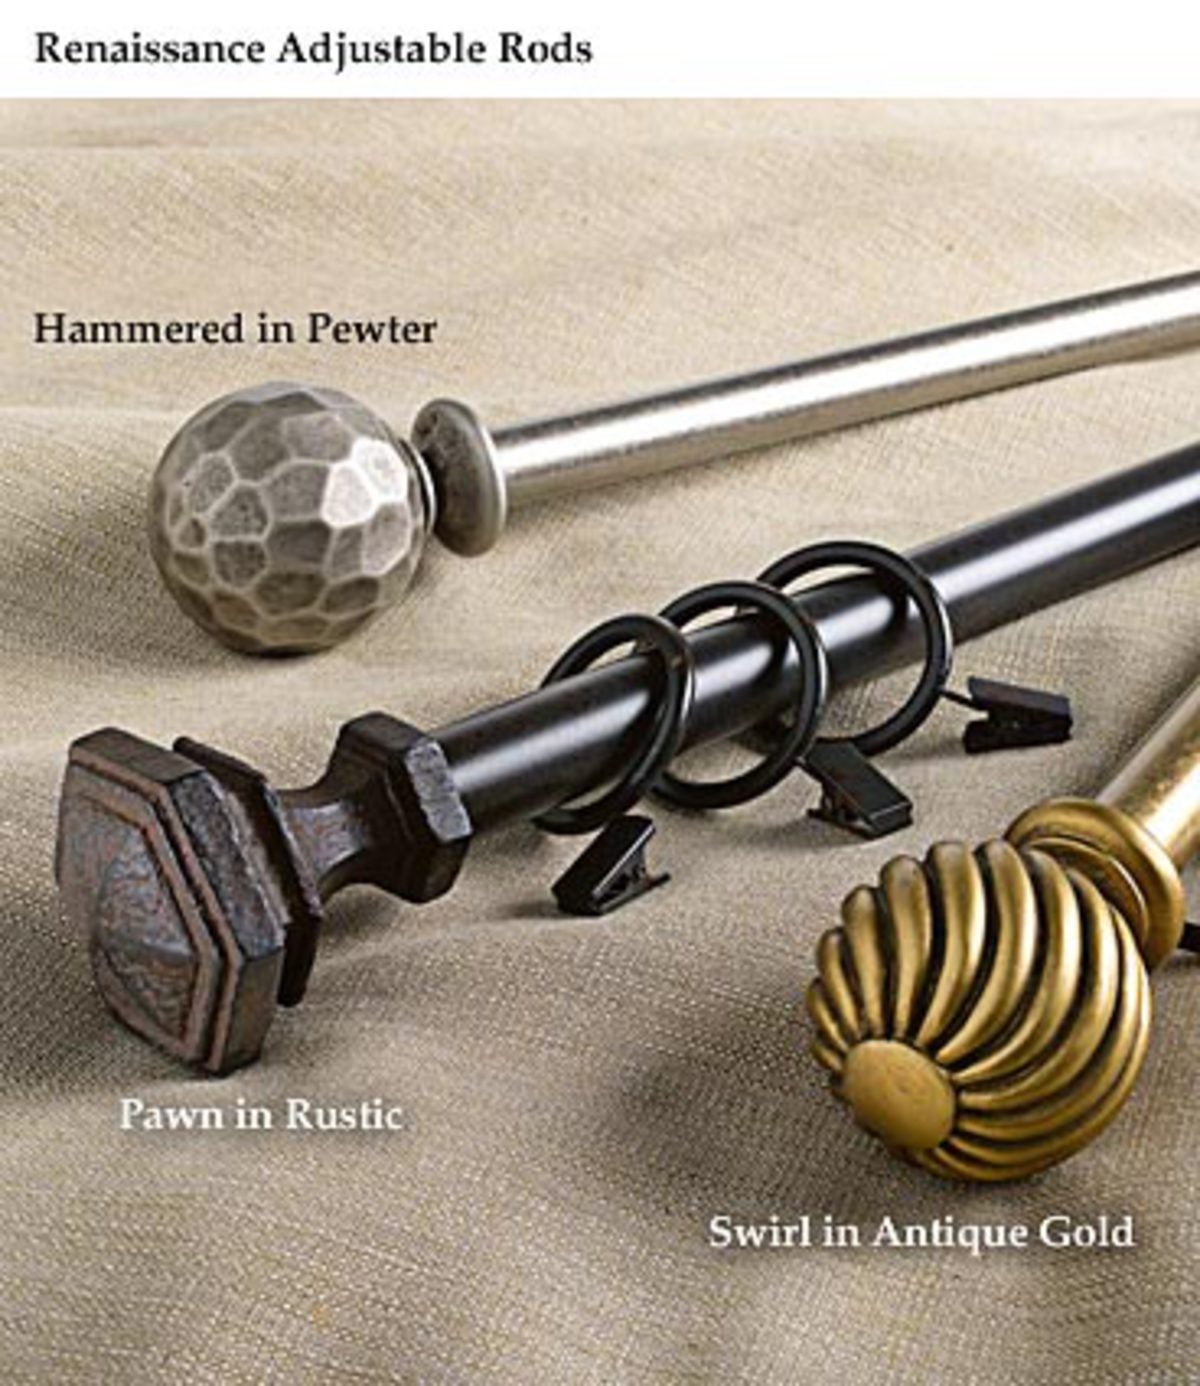 28”- 48”Adjustable Rod and Finial Set in Gold, Pewter or Rustic Finishes - Rustic - PAWN